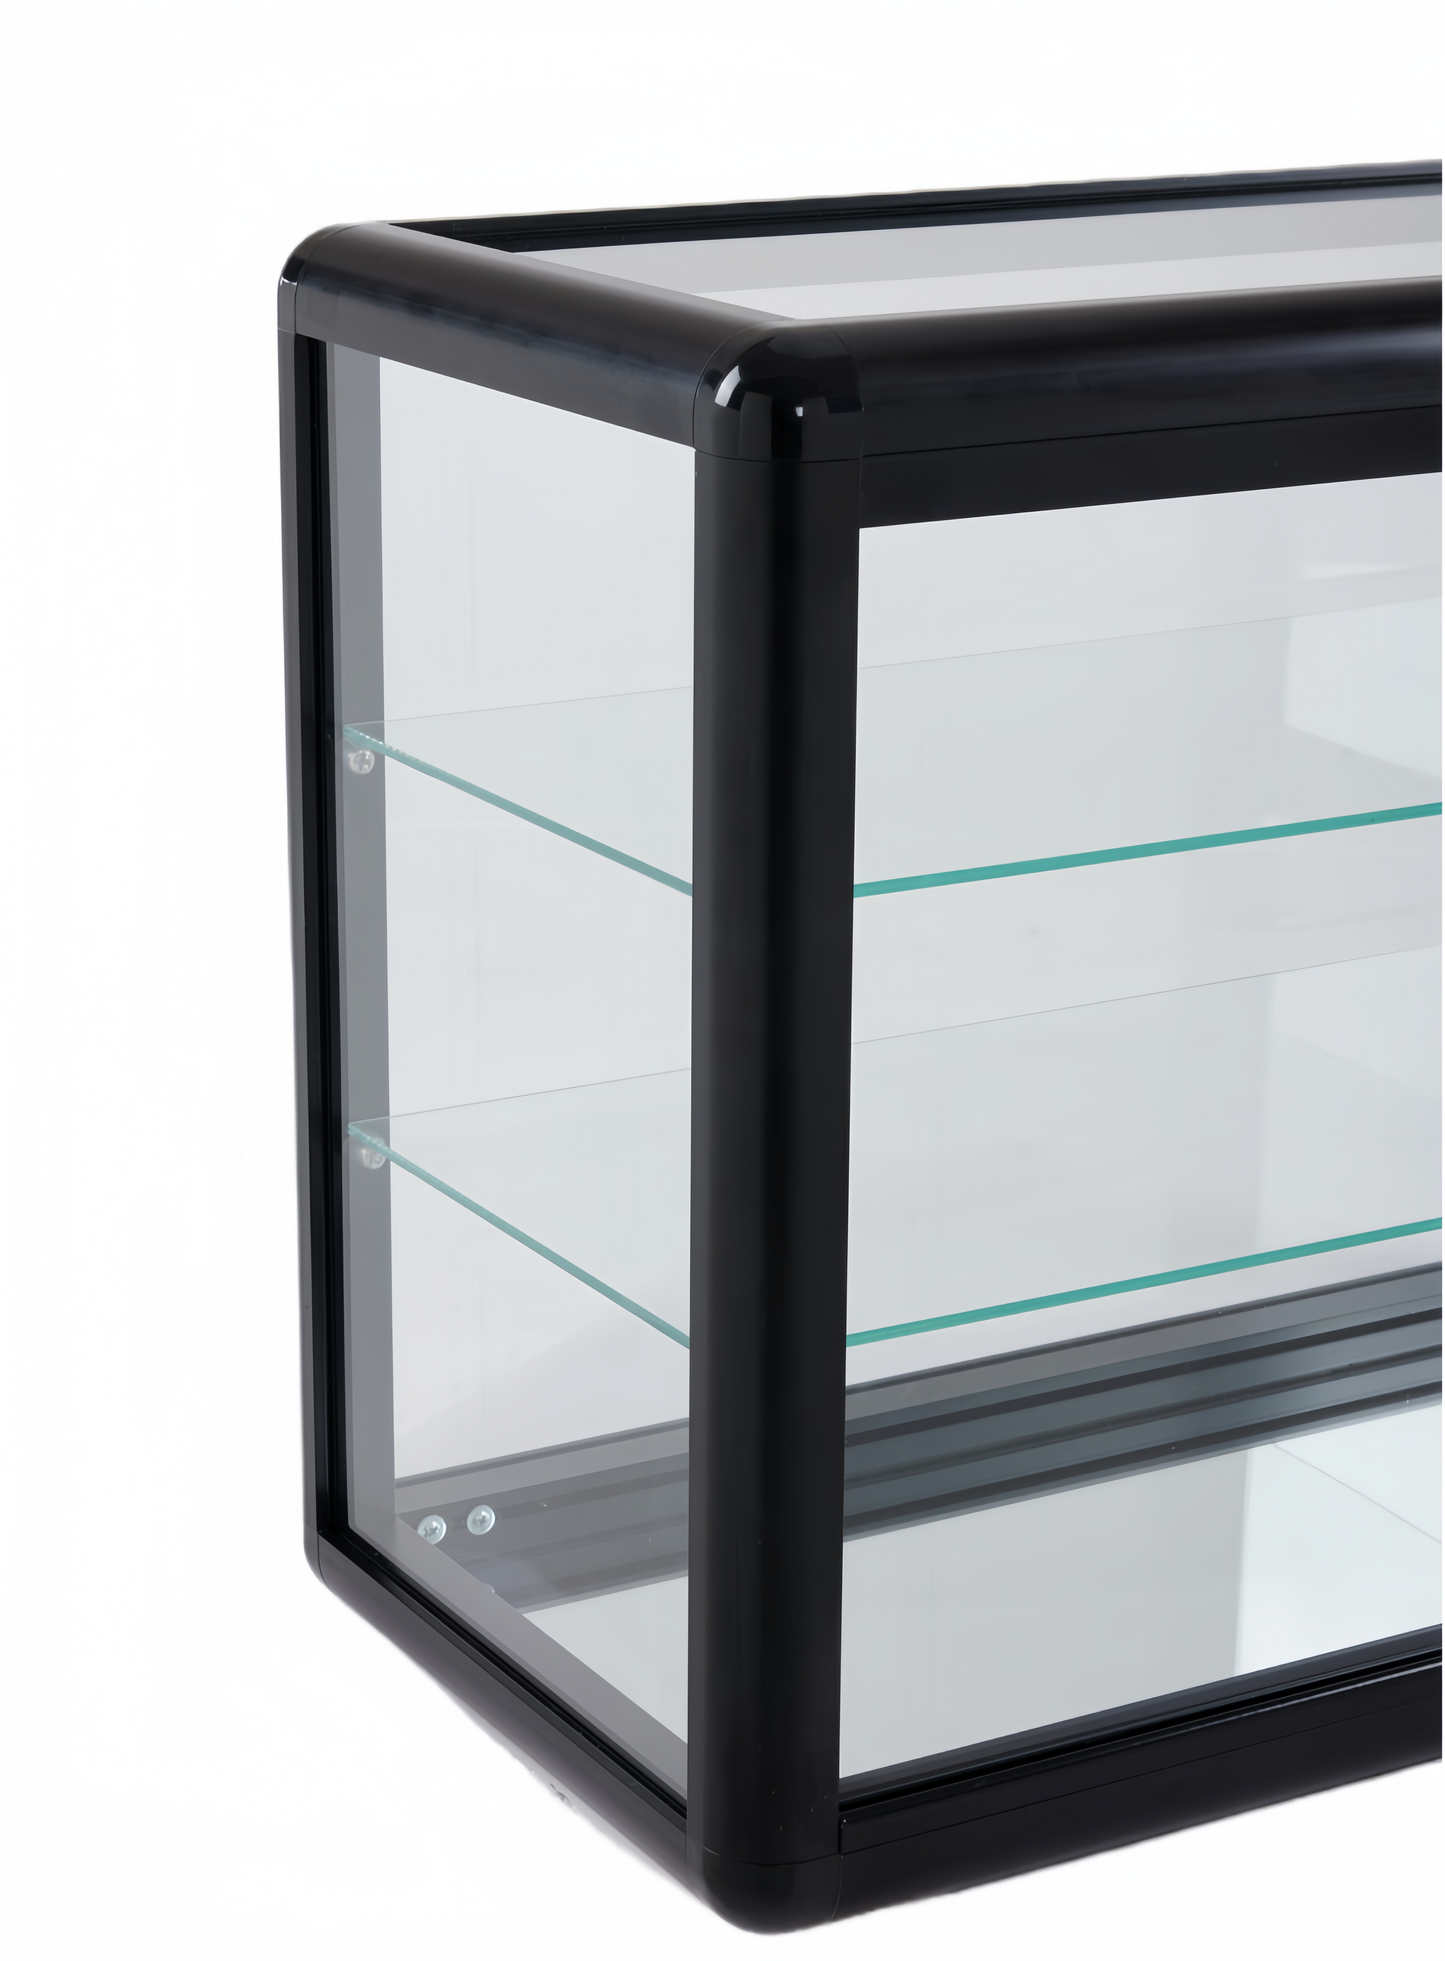 WISDOMFUR 24 x12 inch Aluminum and Glass Countertop Display Showcase -  Stylish Cabinet for Retail, Home, or Office Use  Cabinet